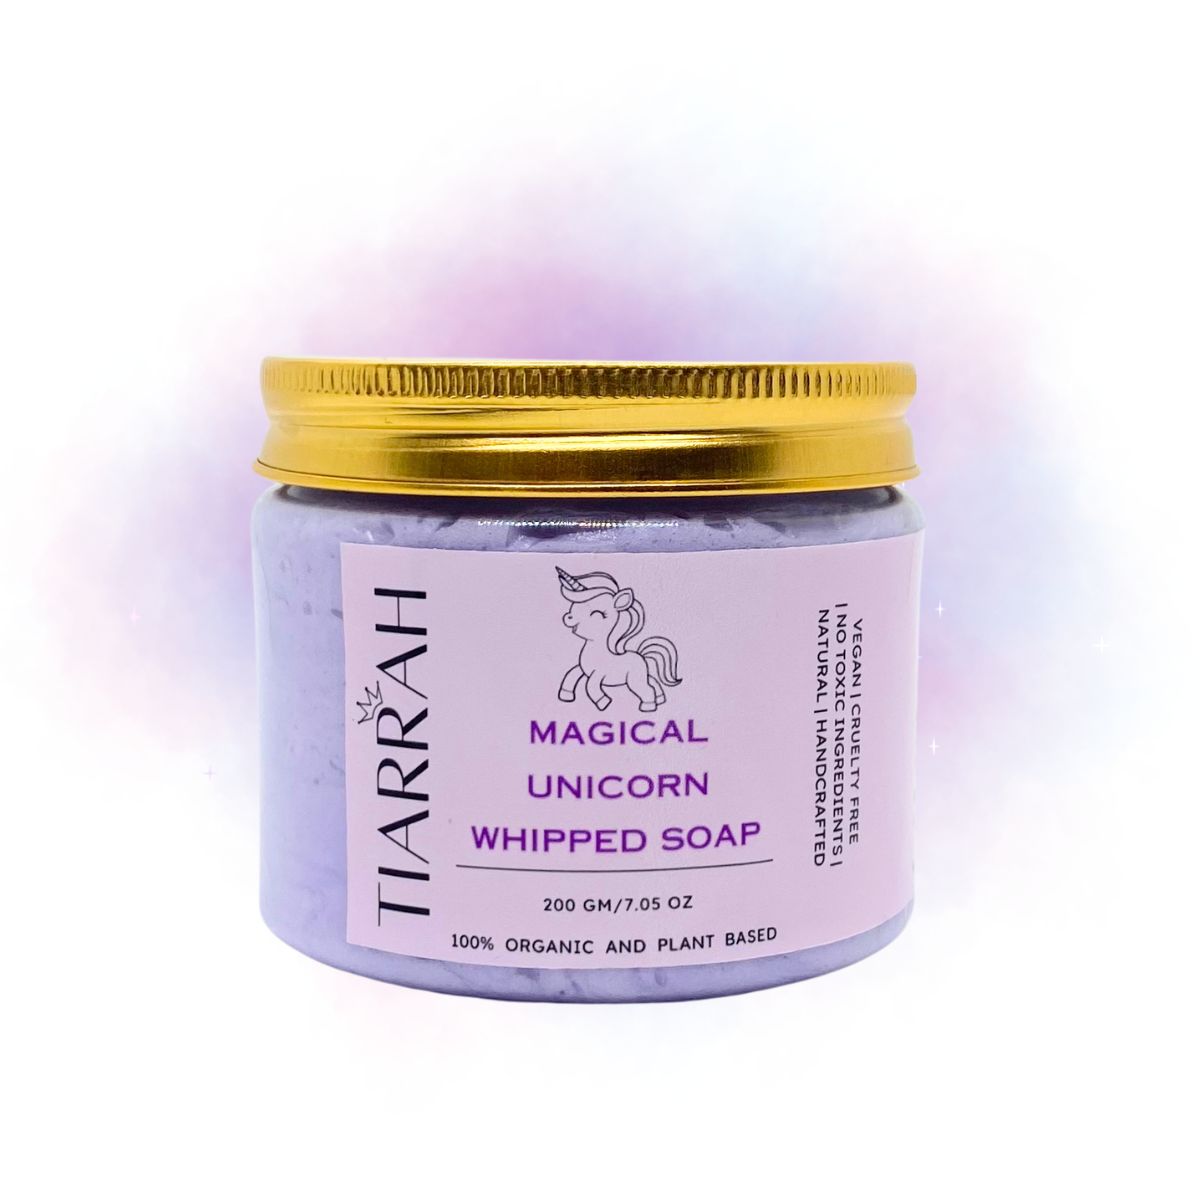 Tiarrah Magical Unicorn Whipped Soap: Natural, Organic, Non-Toxic - The Luxury Bath and Body Care Shop